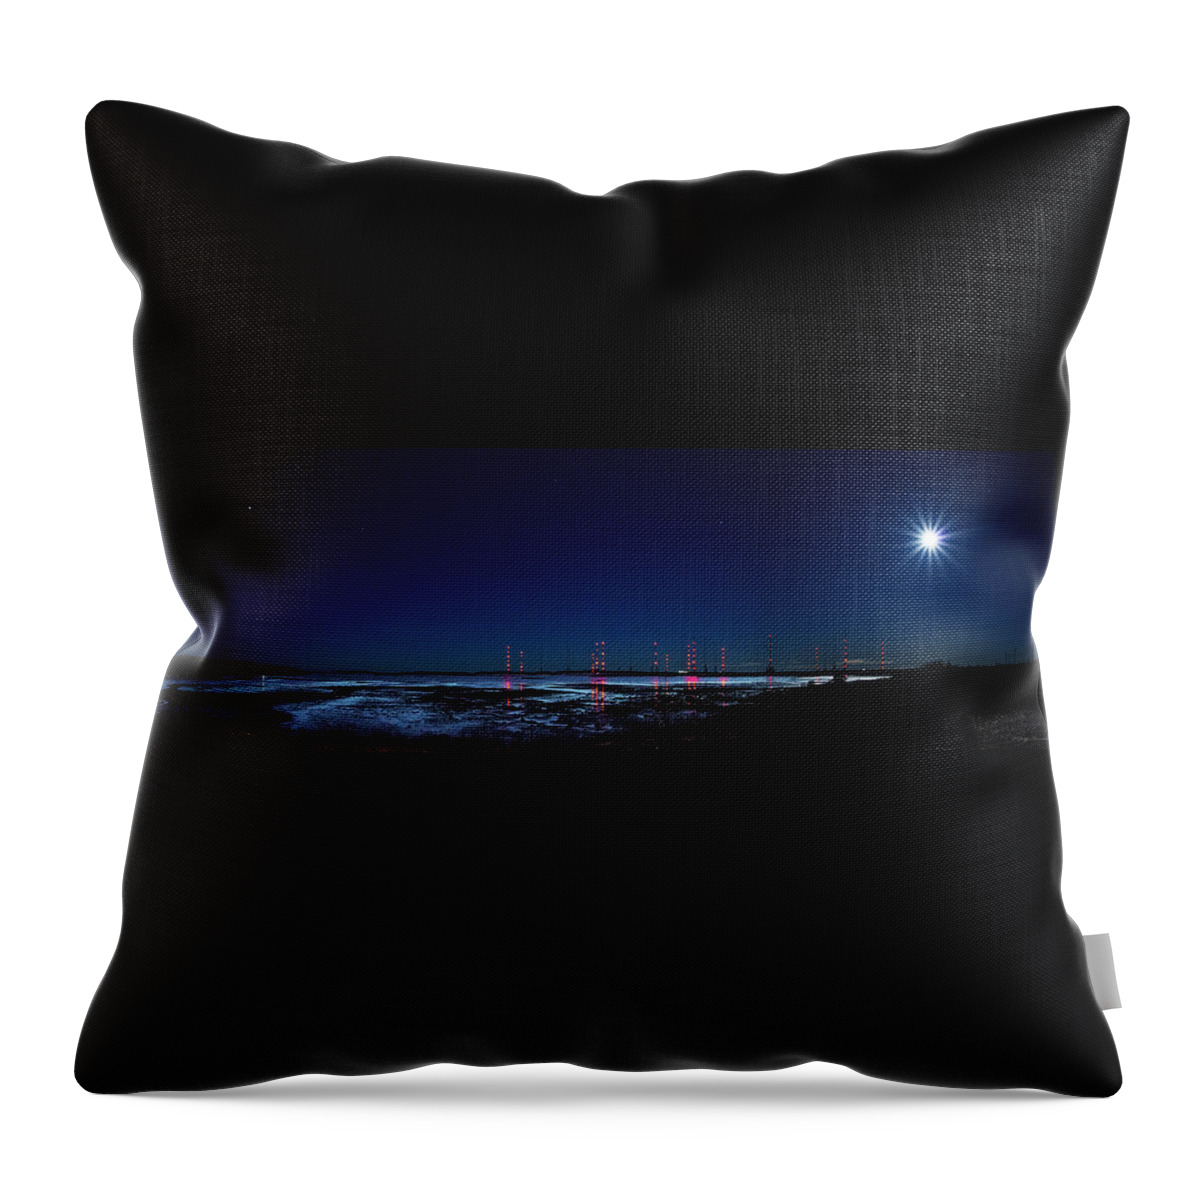 Cutler Naval Transmitter Station Throw Pillow featuring the photograph Cutler Naval Station By Moonlight by Marty Saccone